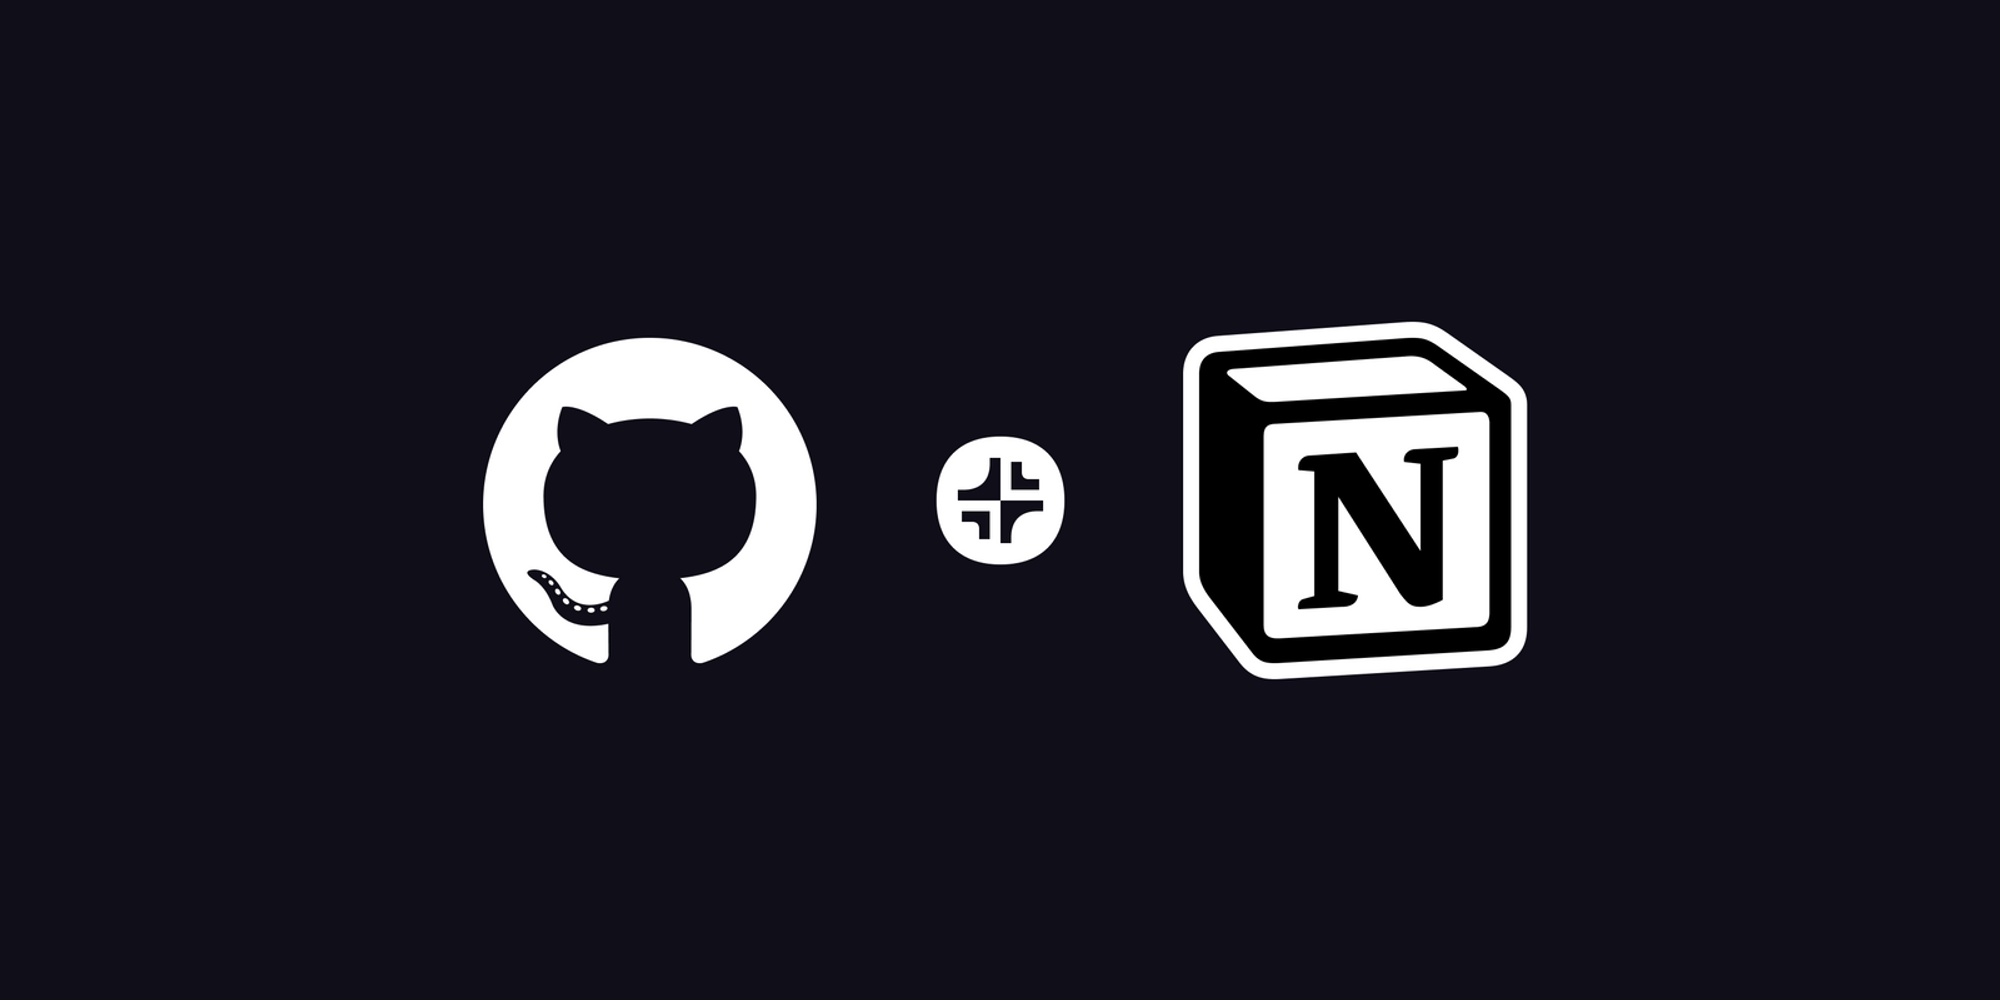 Powered by Notion, loconotion, and GitHub Pages.